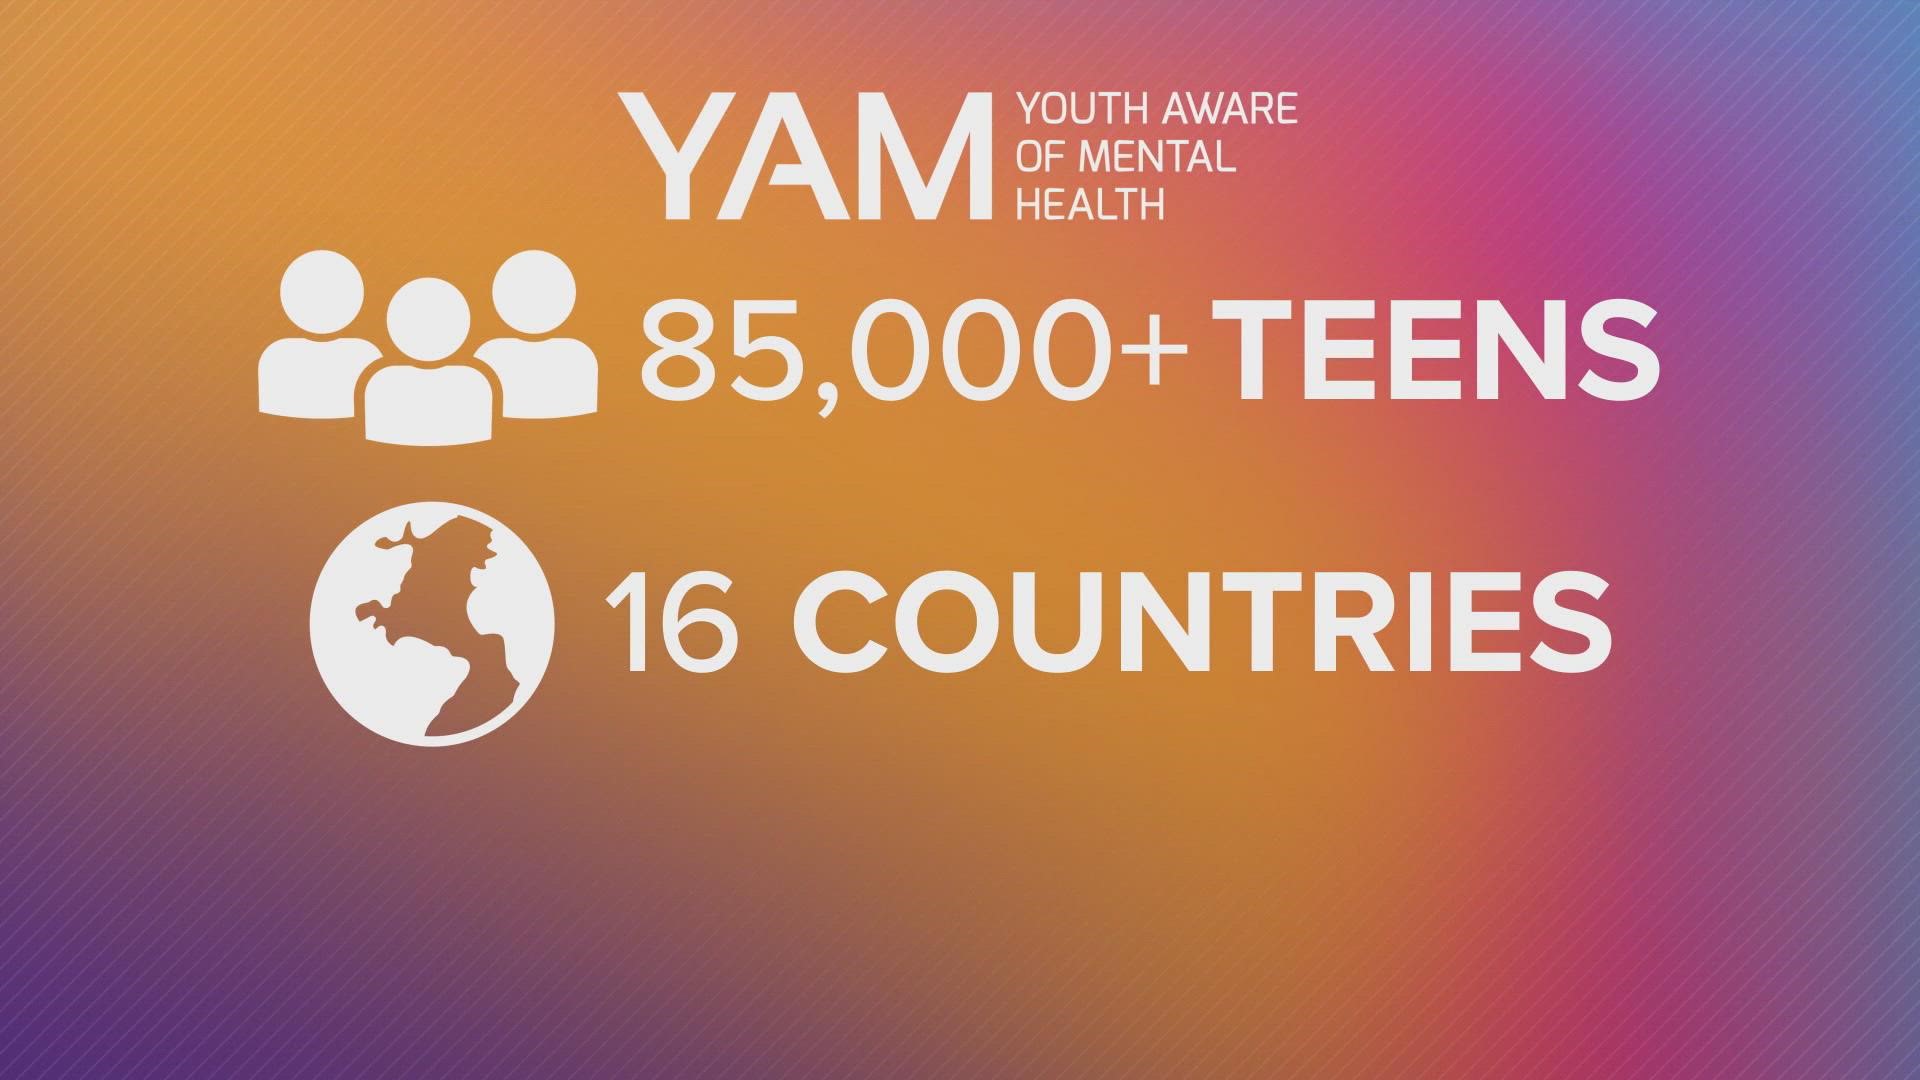 The school's Center for Depression Research launched their "YAM" program to help youths around the world.